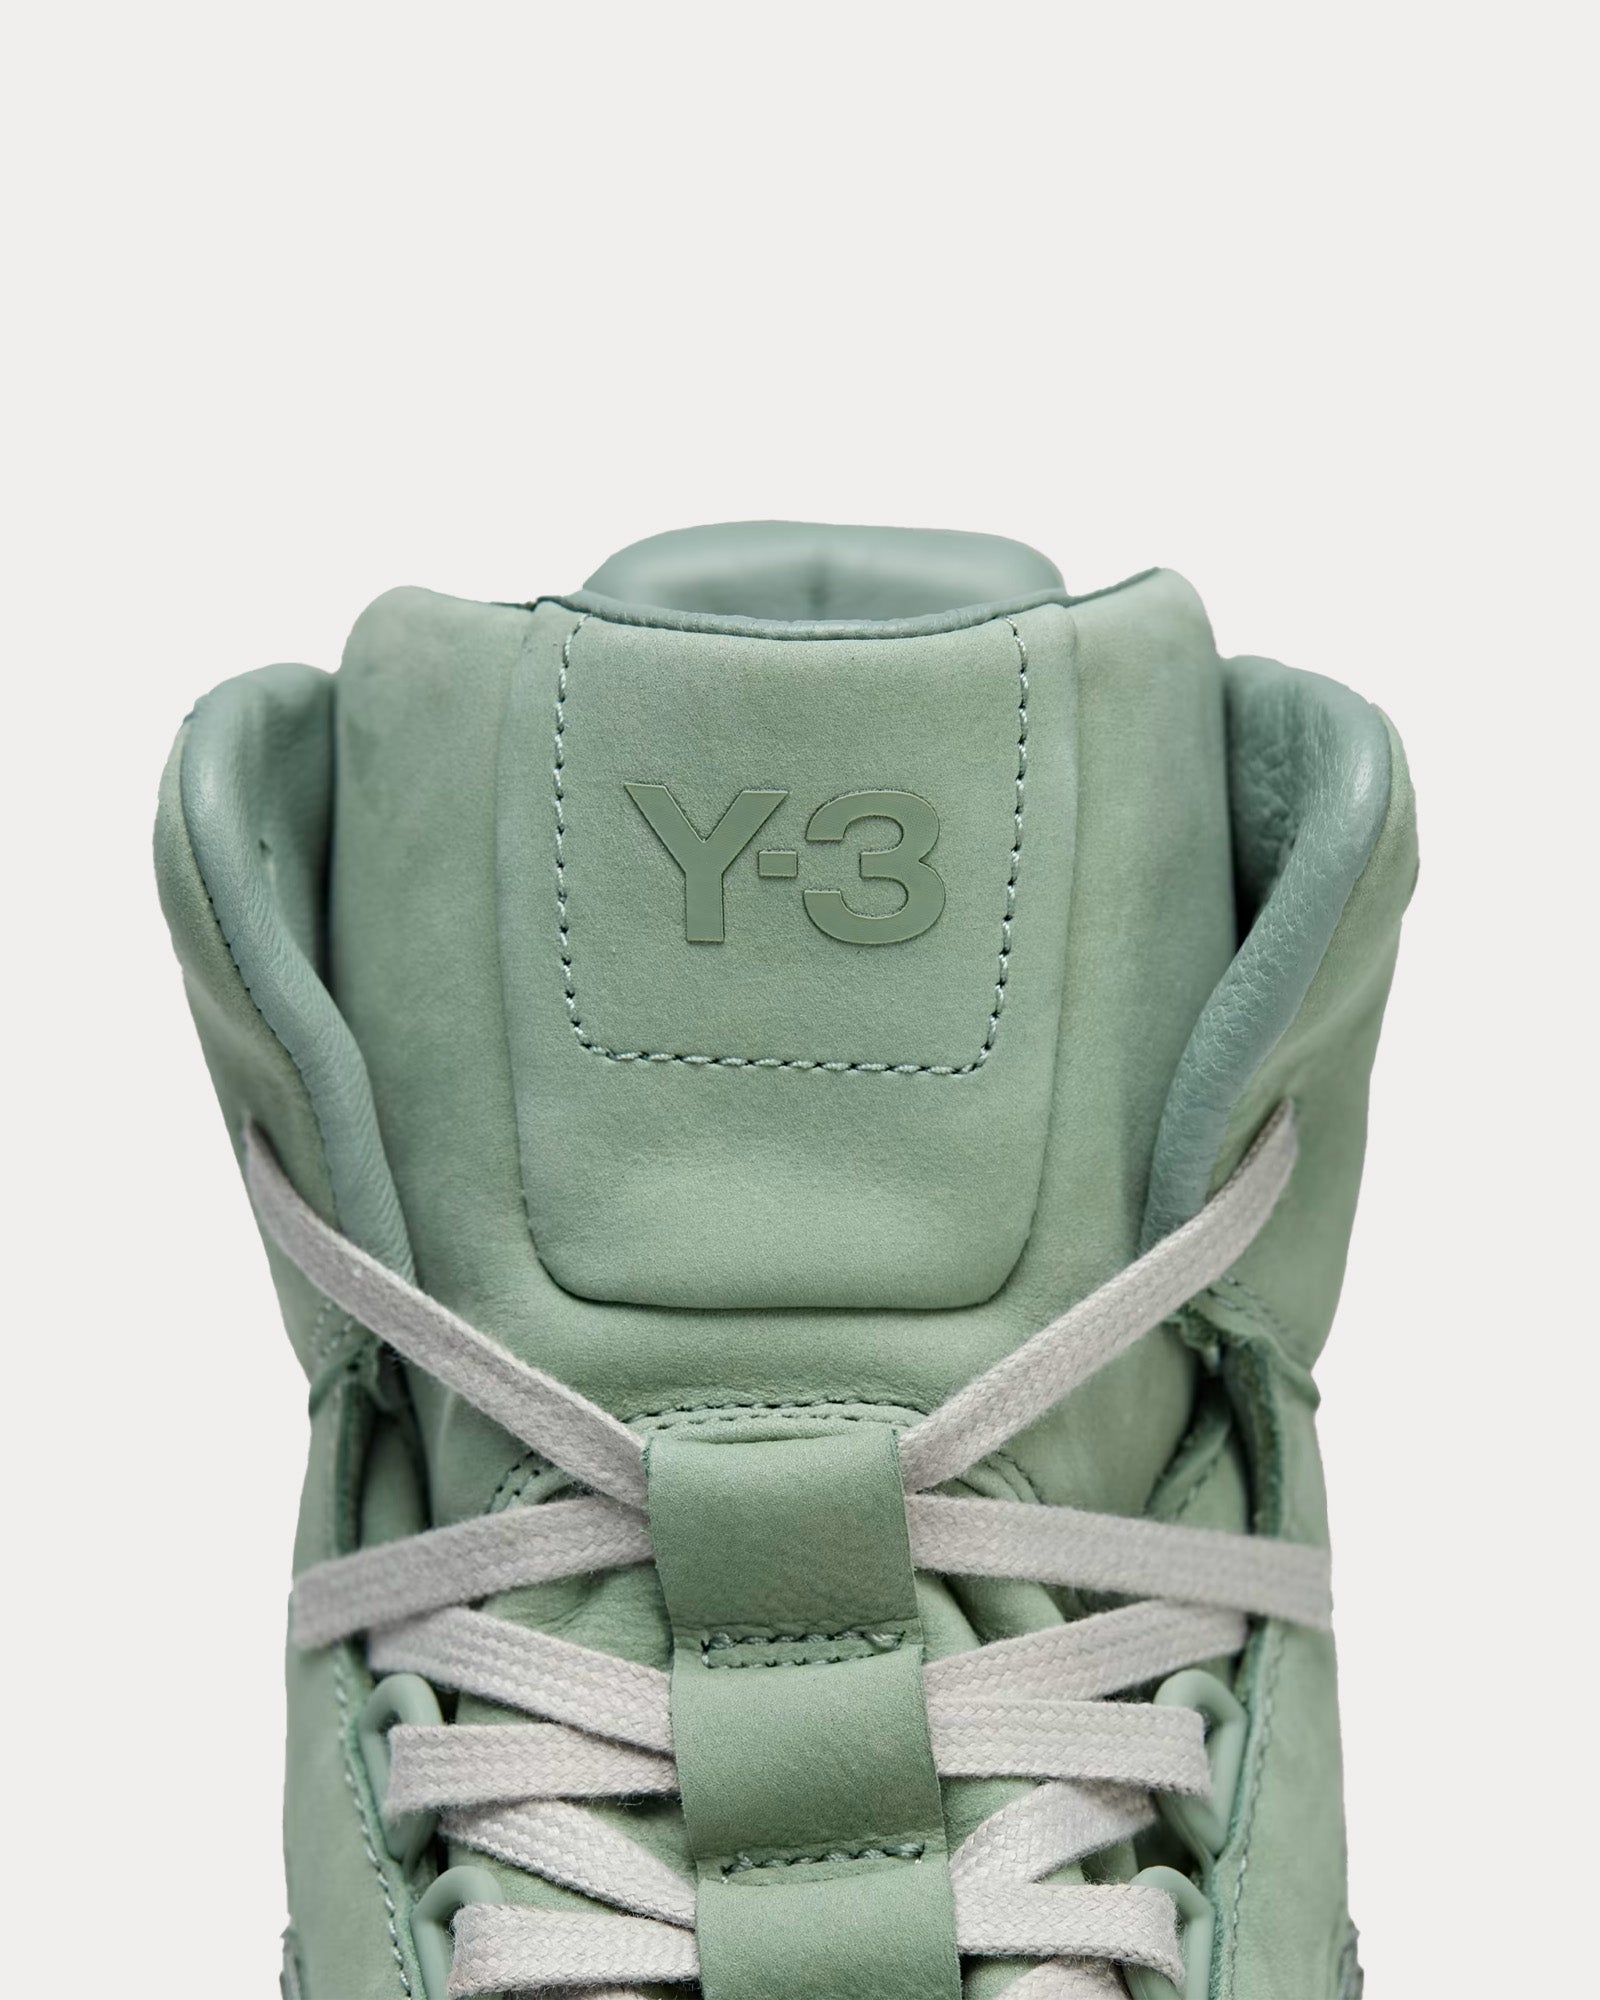 Y-3 - GSG9 Silver Green / Light Brown / Off White High Top Sneakers